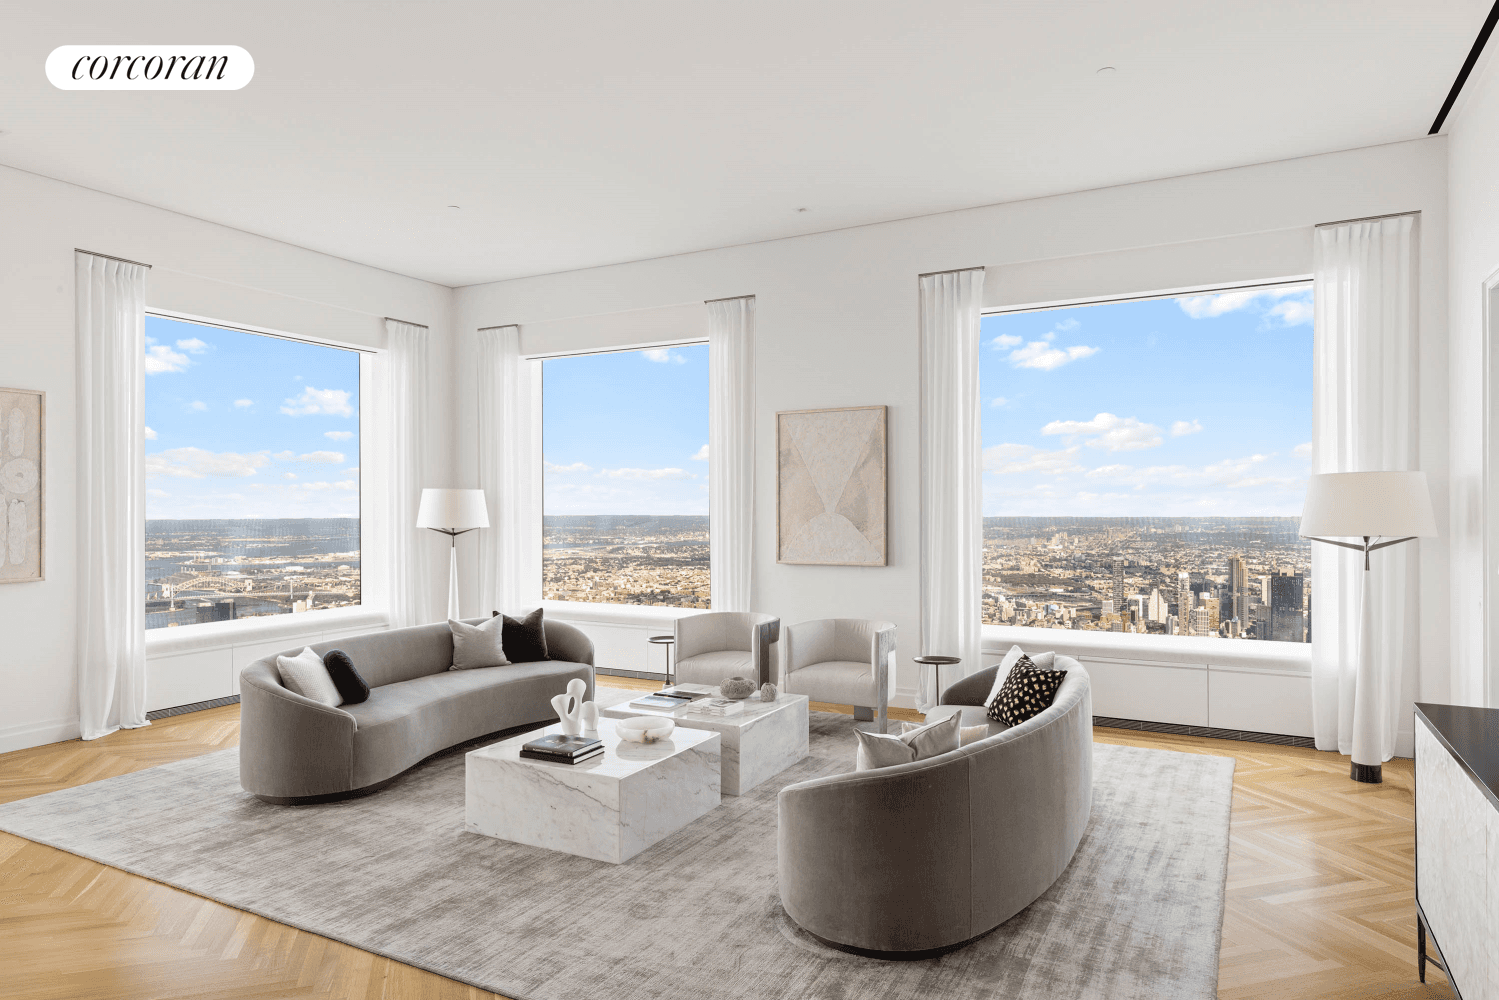 Residence 94A at 432 Park AvenueThree Bedrooms Three and a Half Baths Library Powder Room 3, 952 sqftOver 87 linear feet of direct Central Park and City views with 12'6 ...